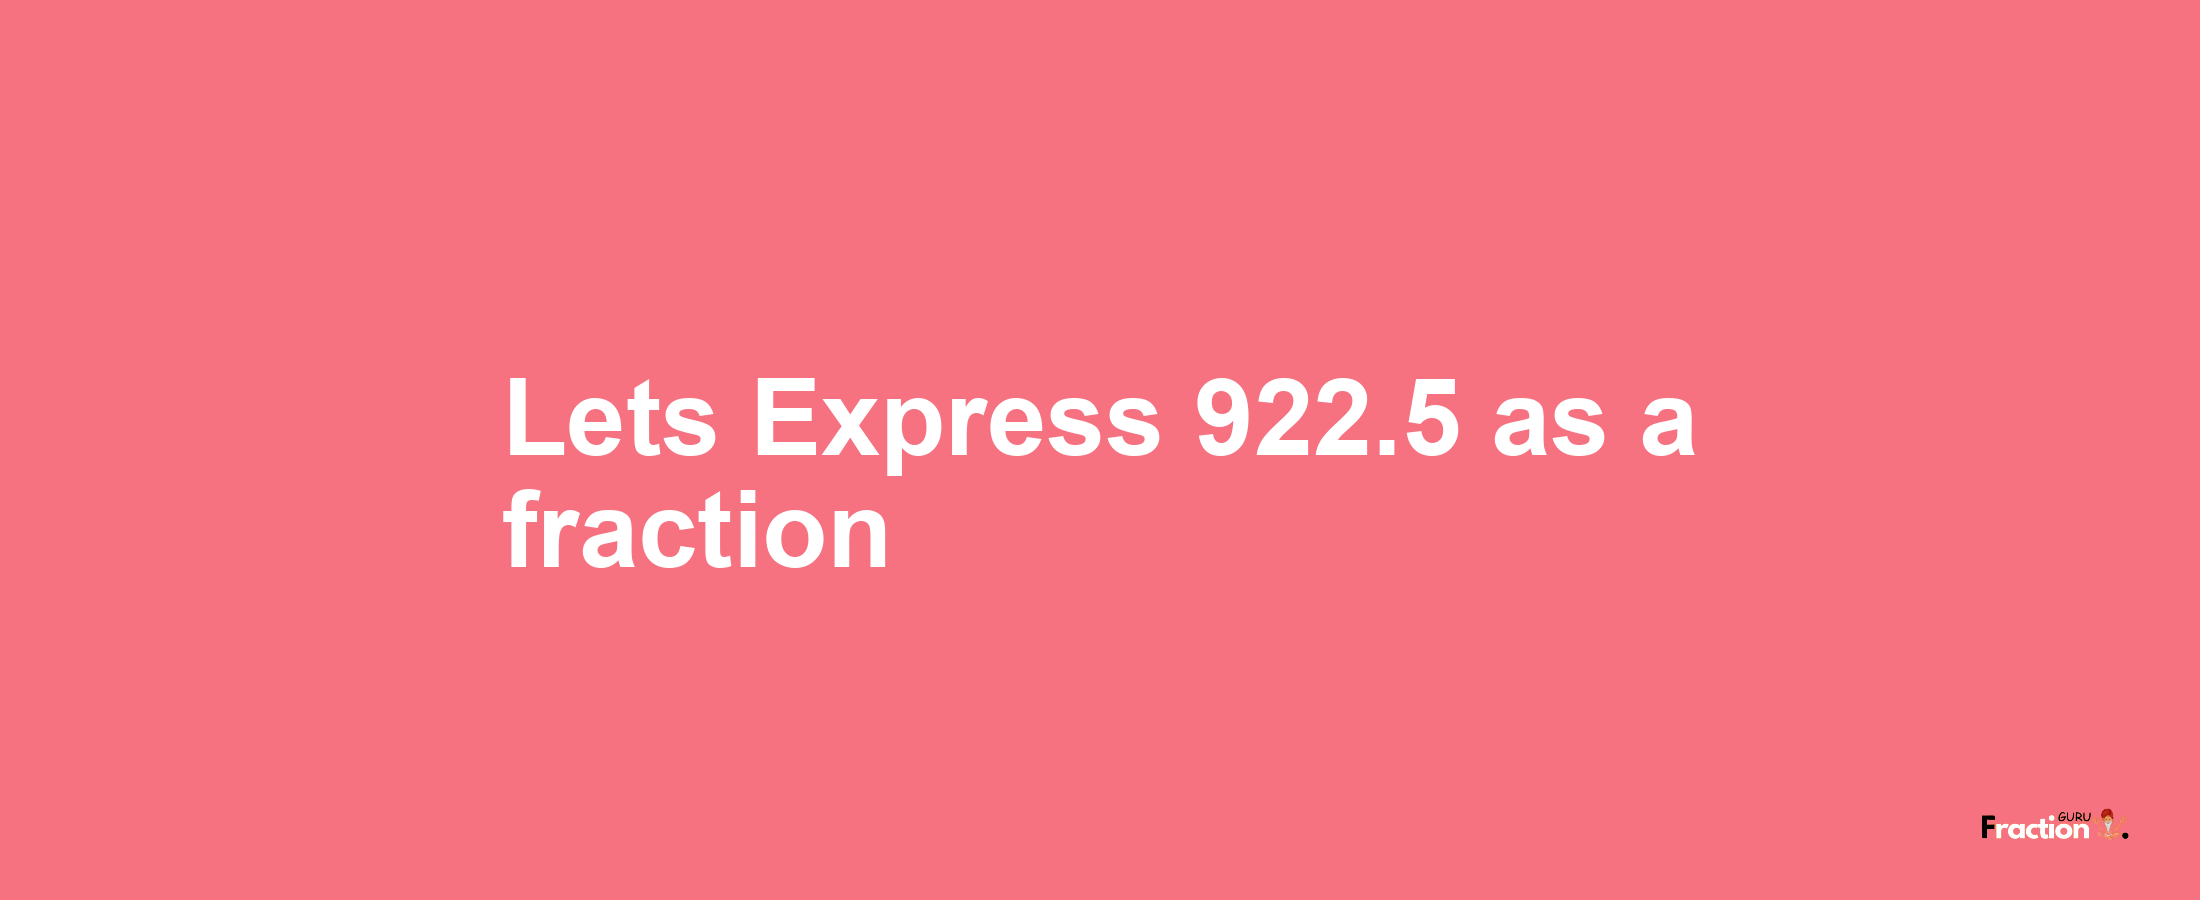 Lets Express 922.5 as afraction